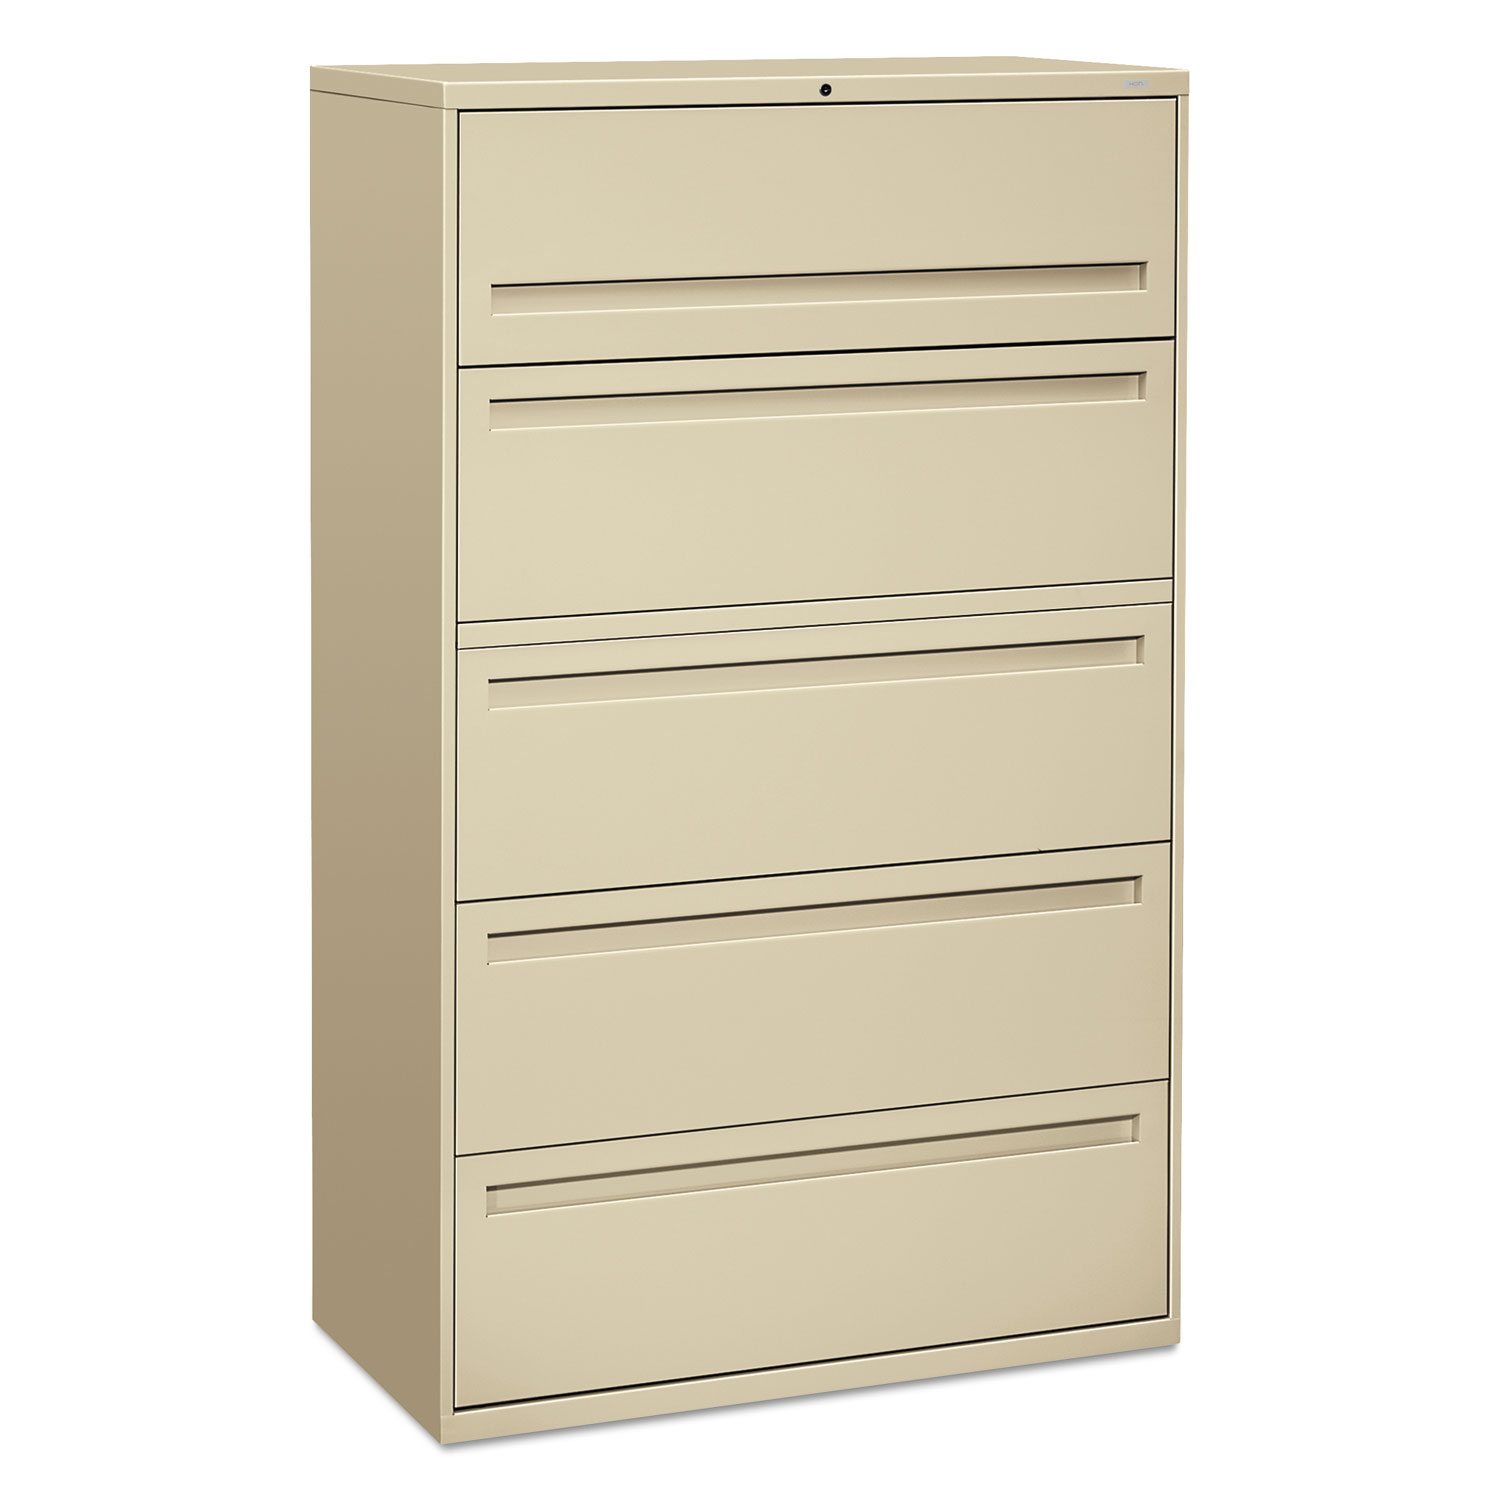  HON H795.L.L 700 Series Five-Drawer Lateral File with Roll-Out Shelves, 42w x 18d x 64.25h, Putty (HON795LL) 